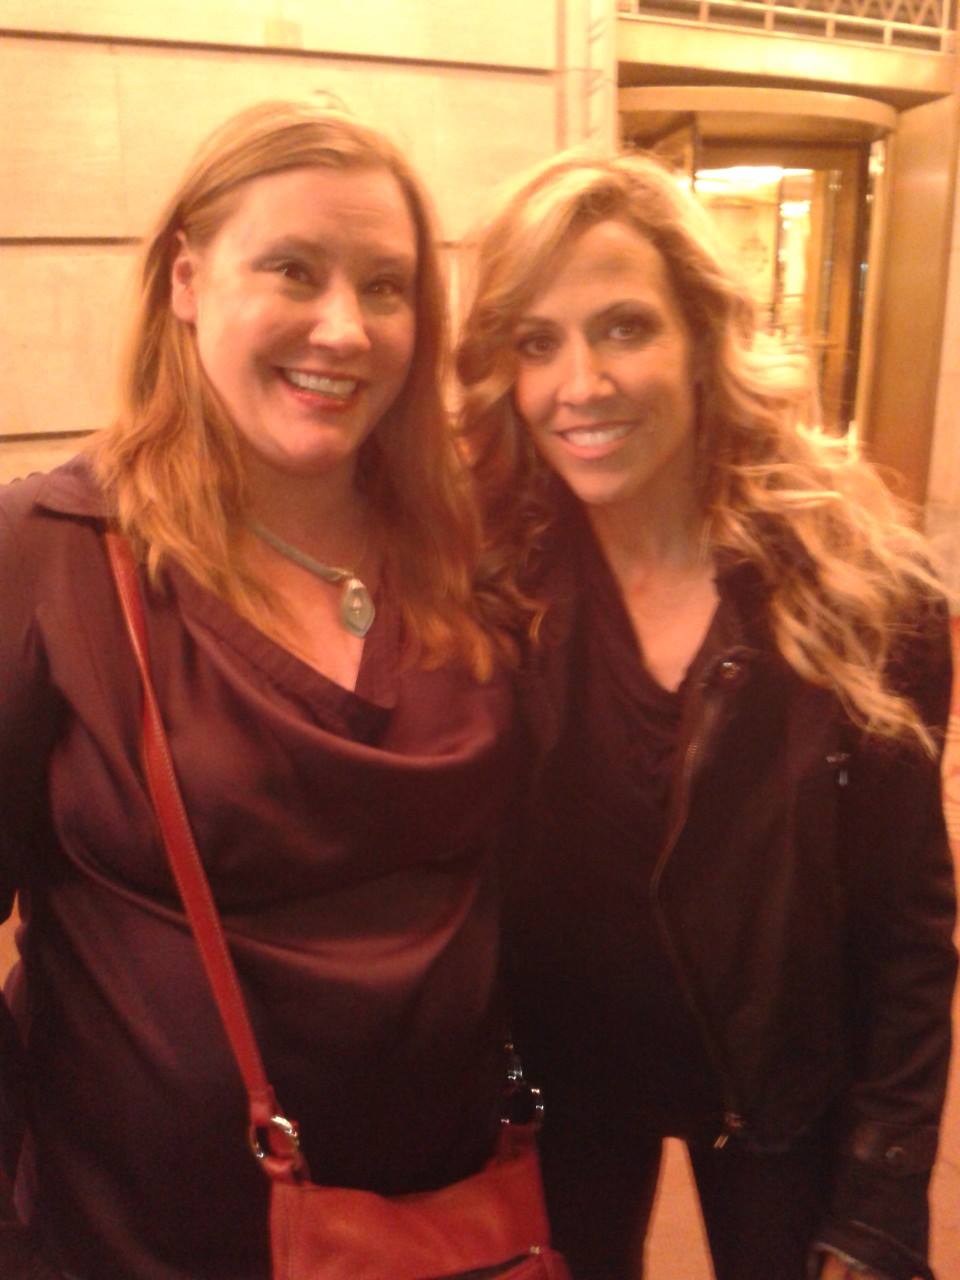 April Szykeruk and Sheryl Crow at the taping of Live From The Artists Den September 2013